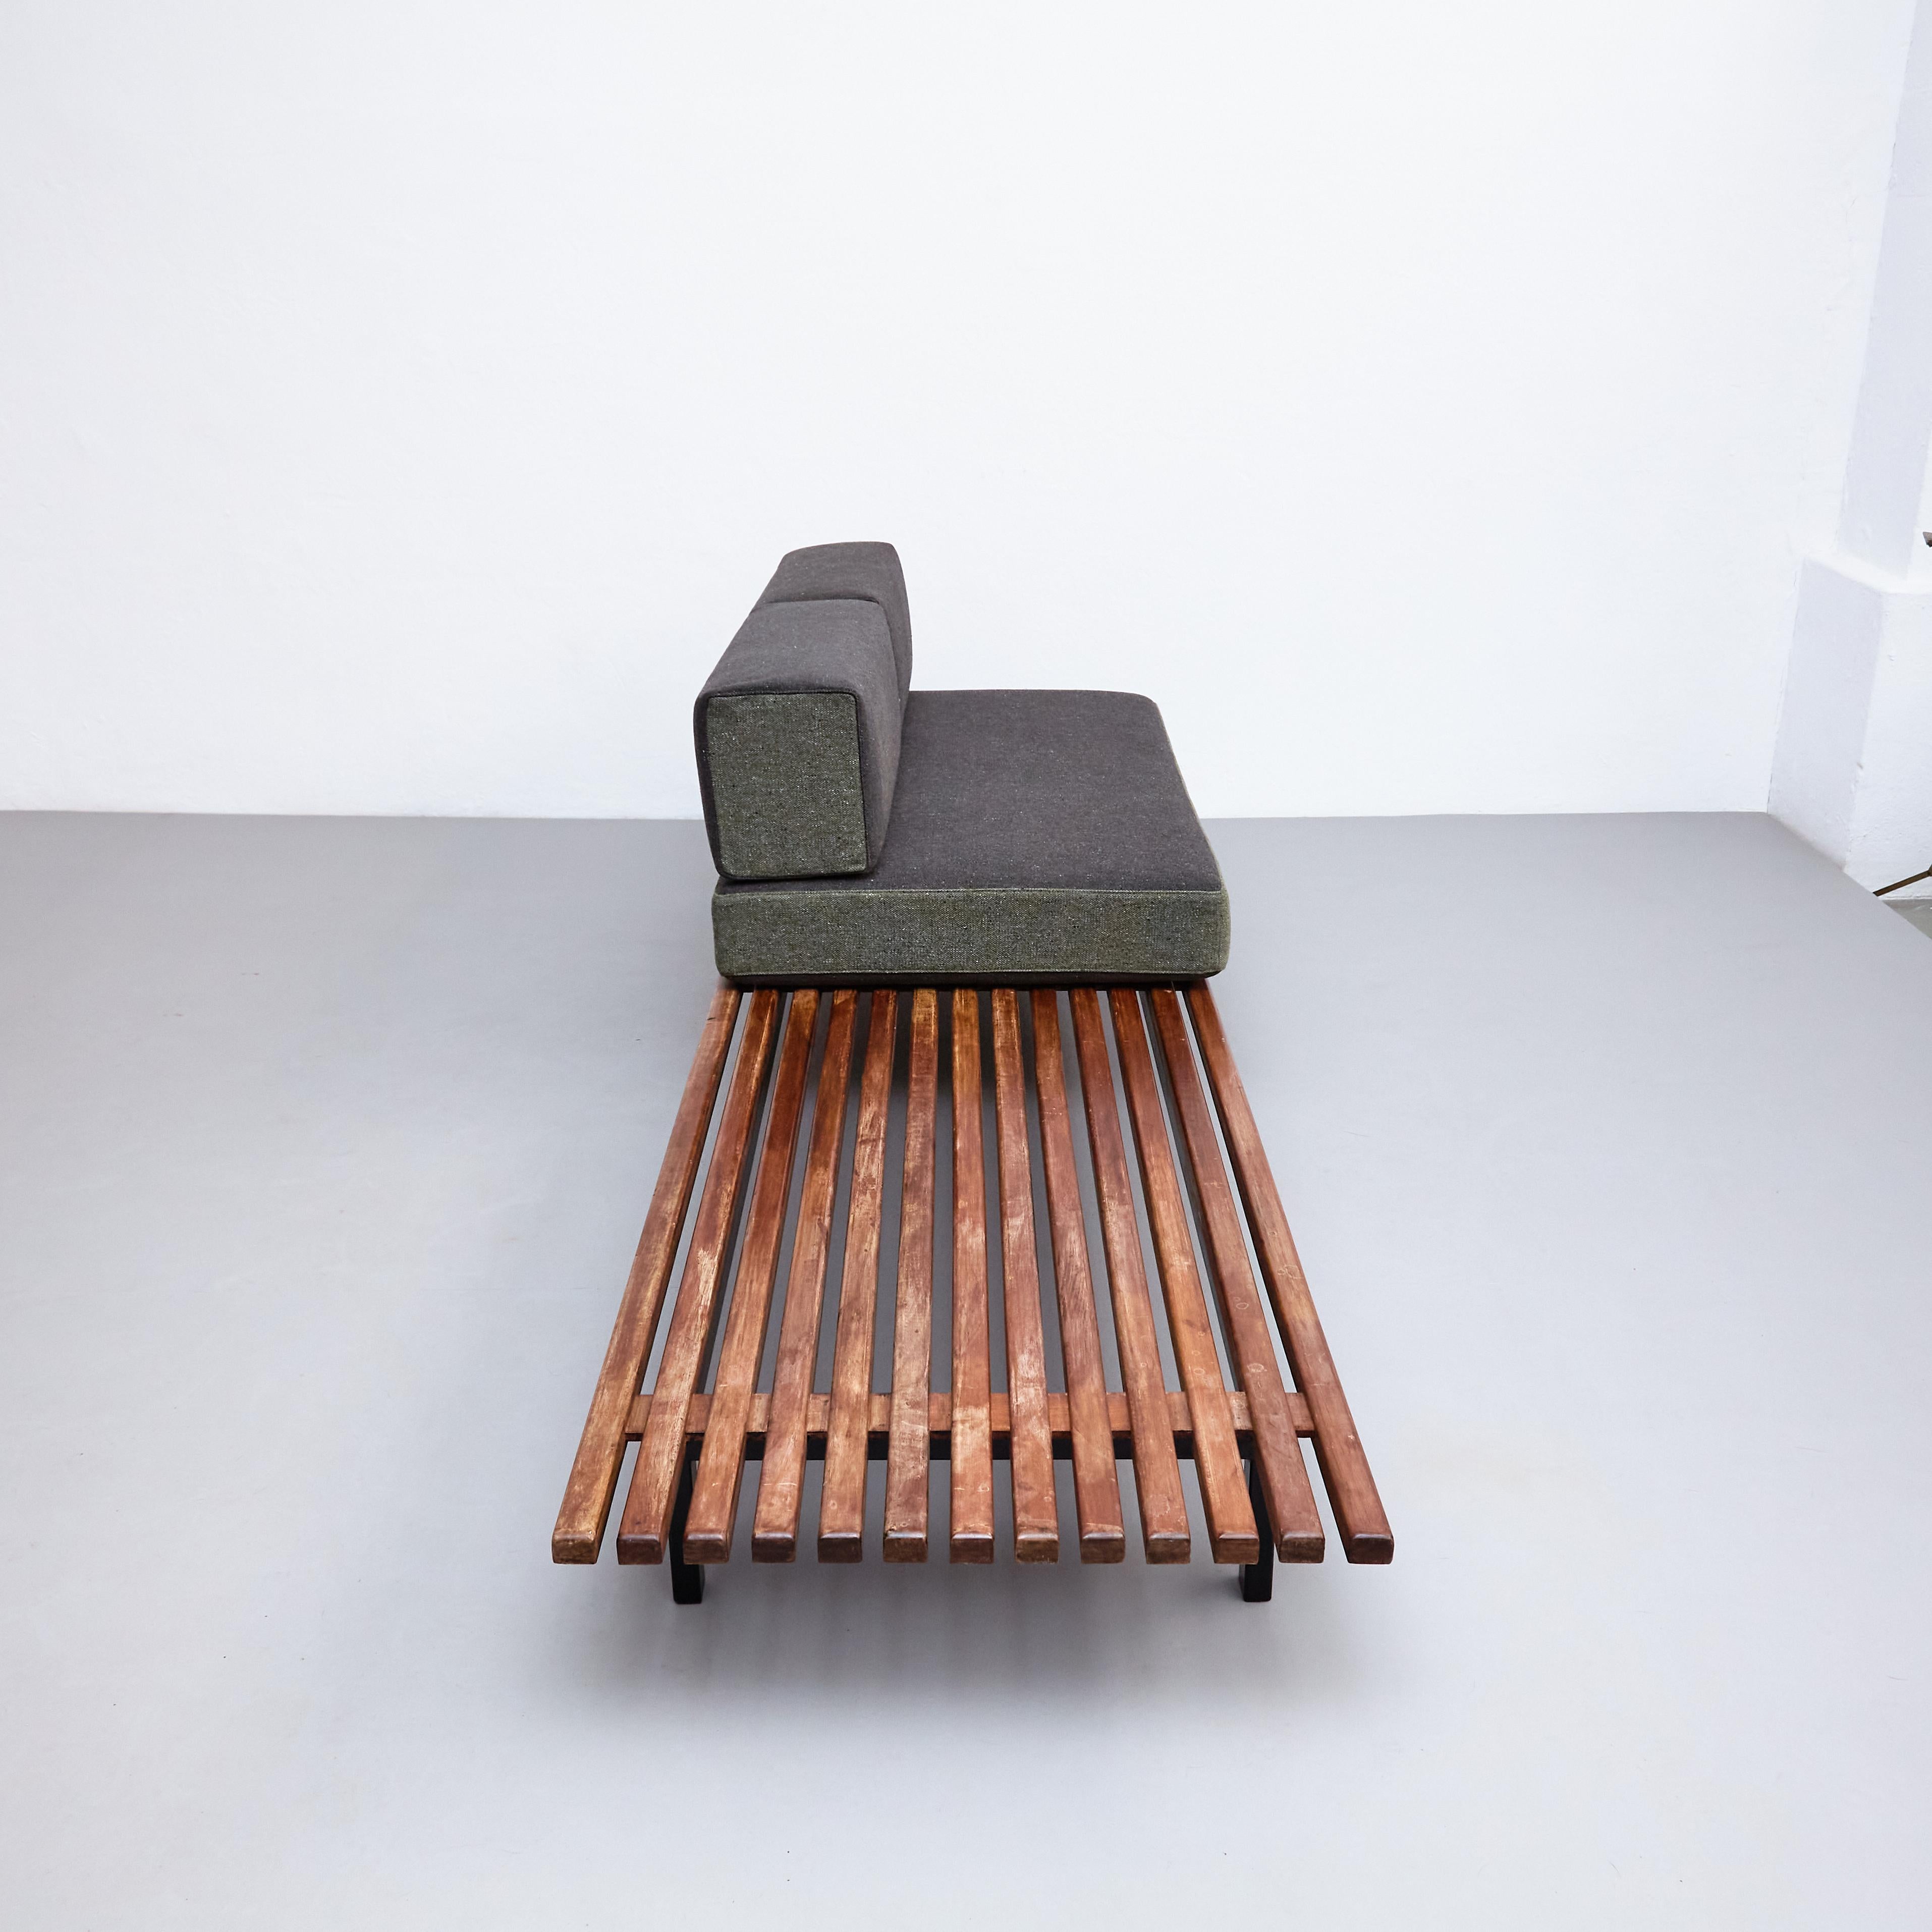 Metal Charlotte Perriand Cansado Bench, circa 1950 For Sale